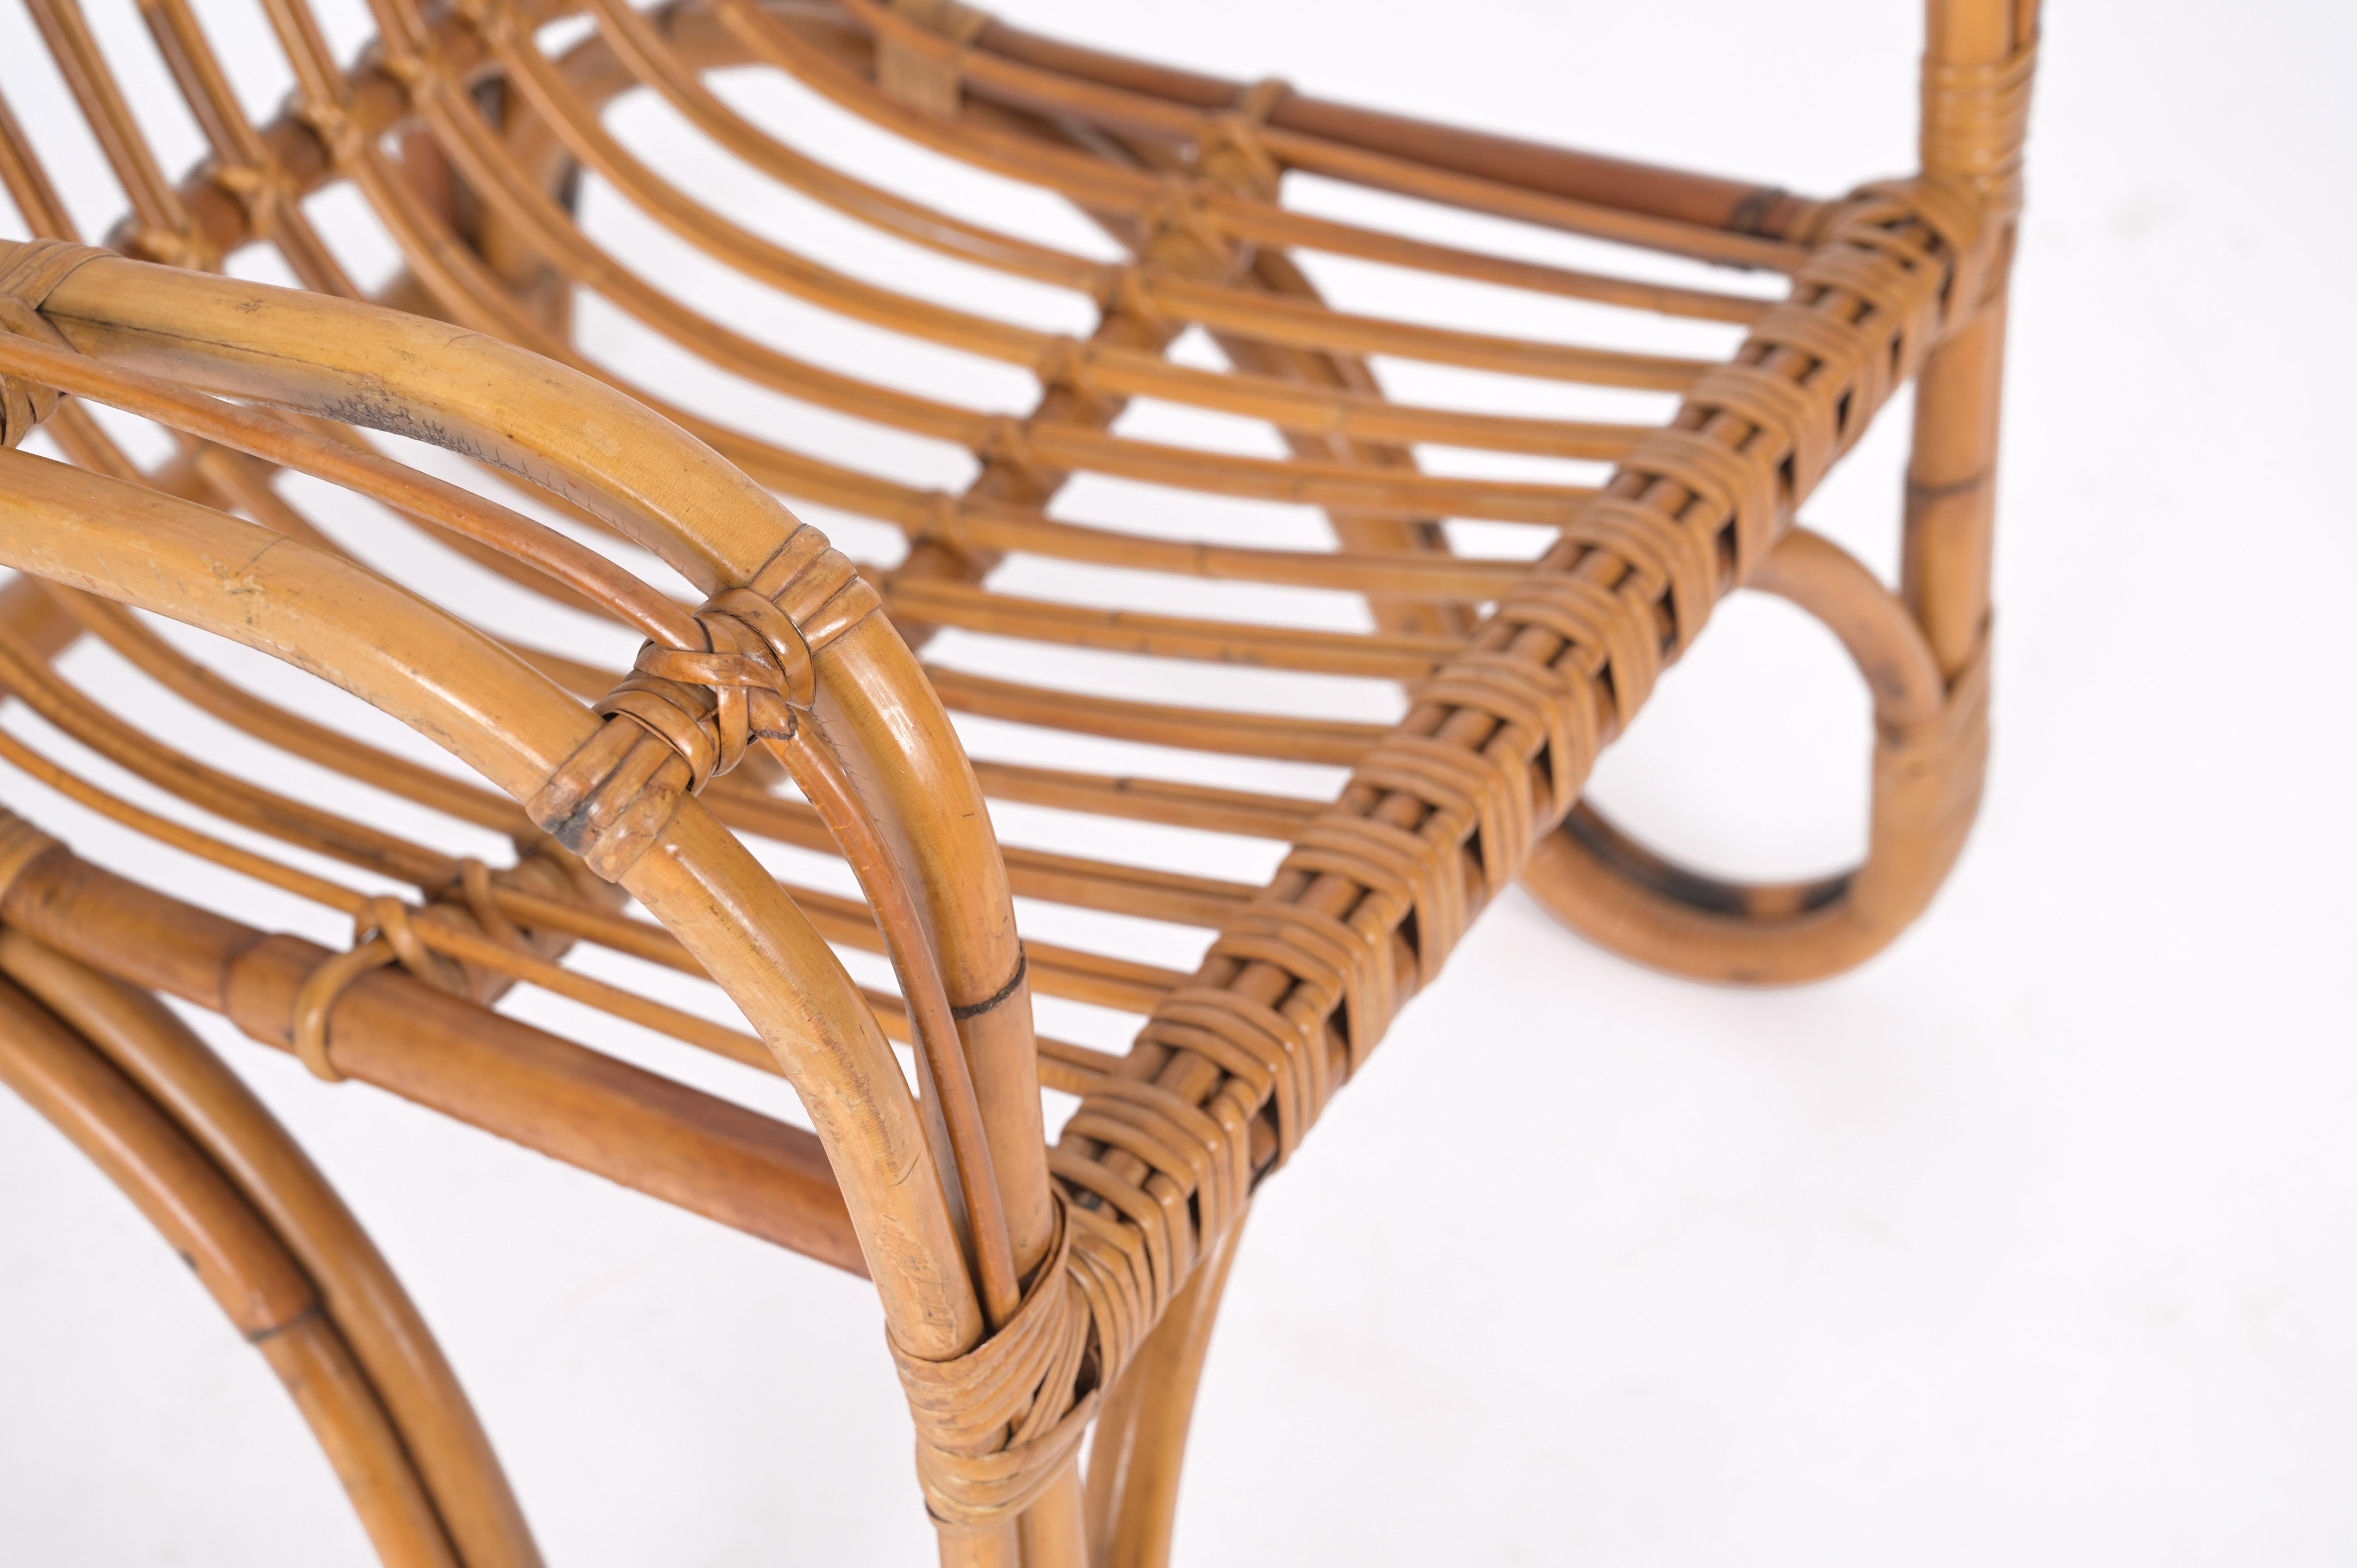 Pair of Midcentury Italian Armchairs in Rattan and Wicker, Tito Agnoli, 1960s For Sale 6